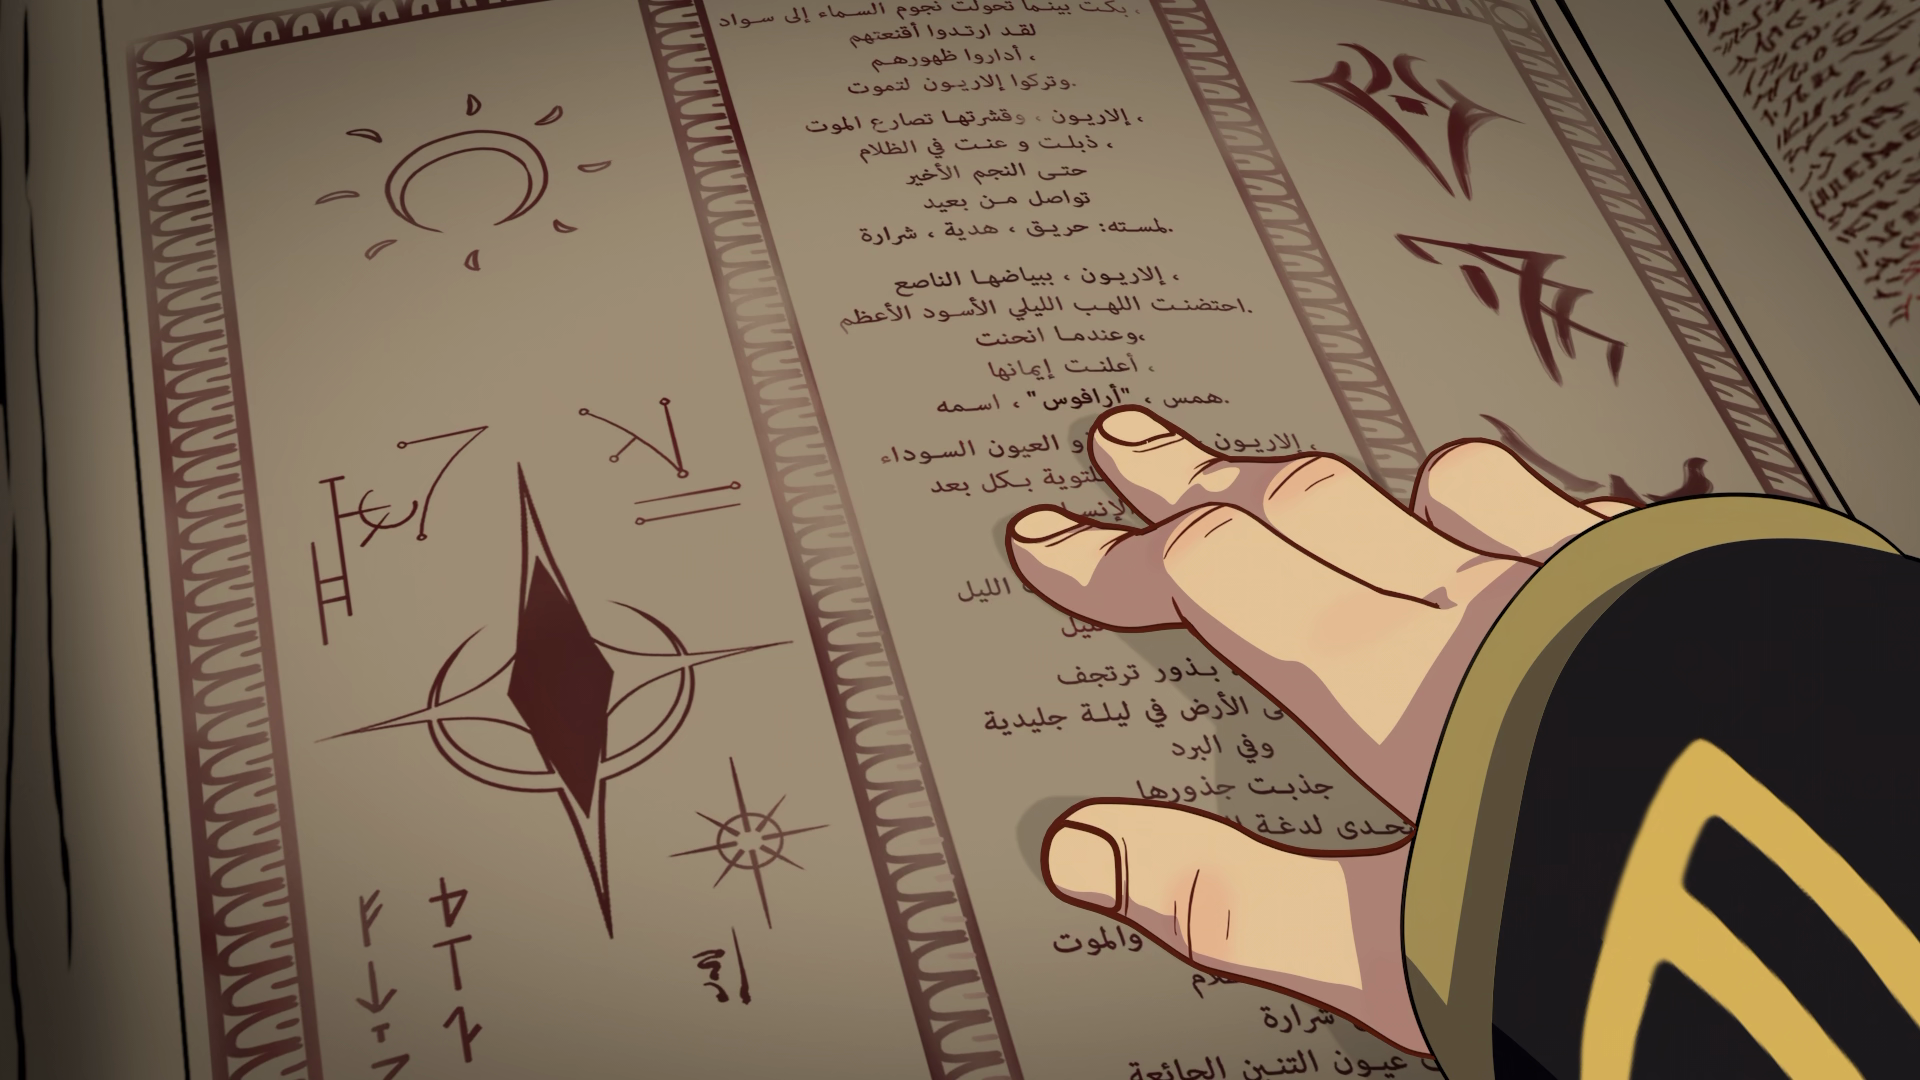 Arabic text about Aaravos in s02e08 (10:24)